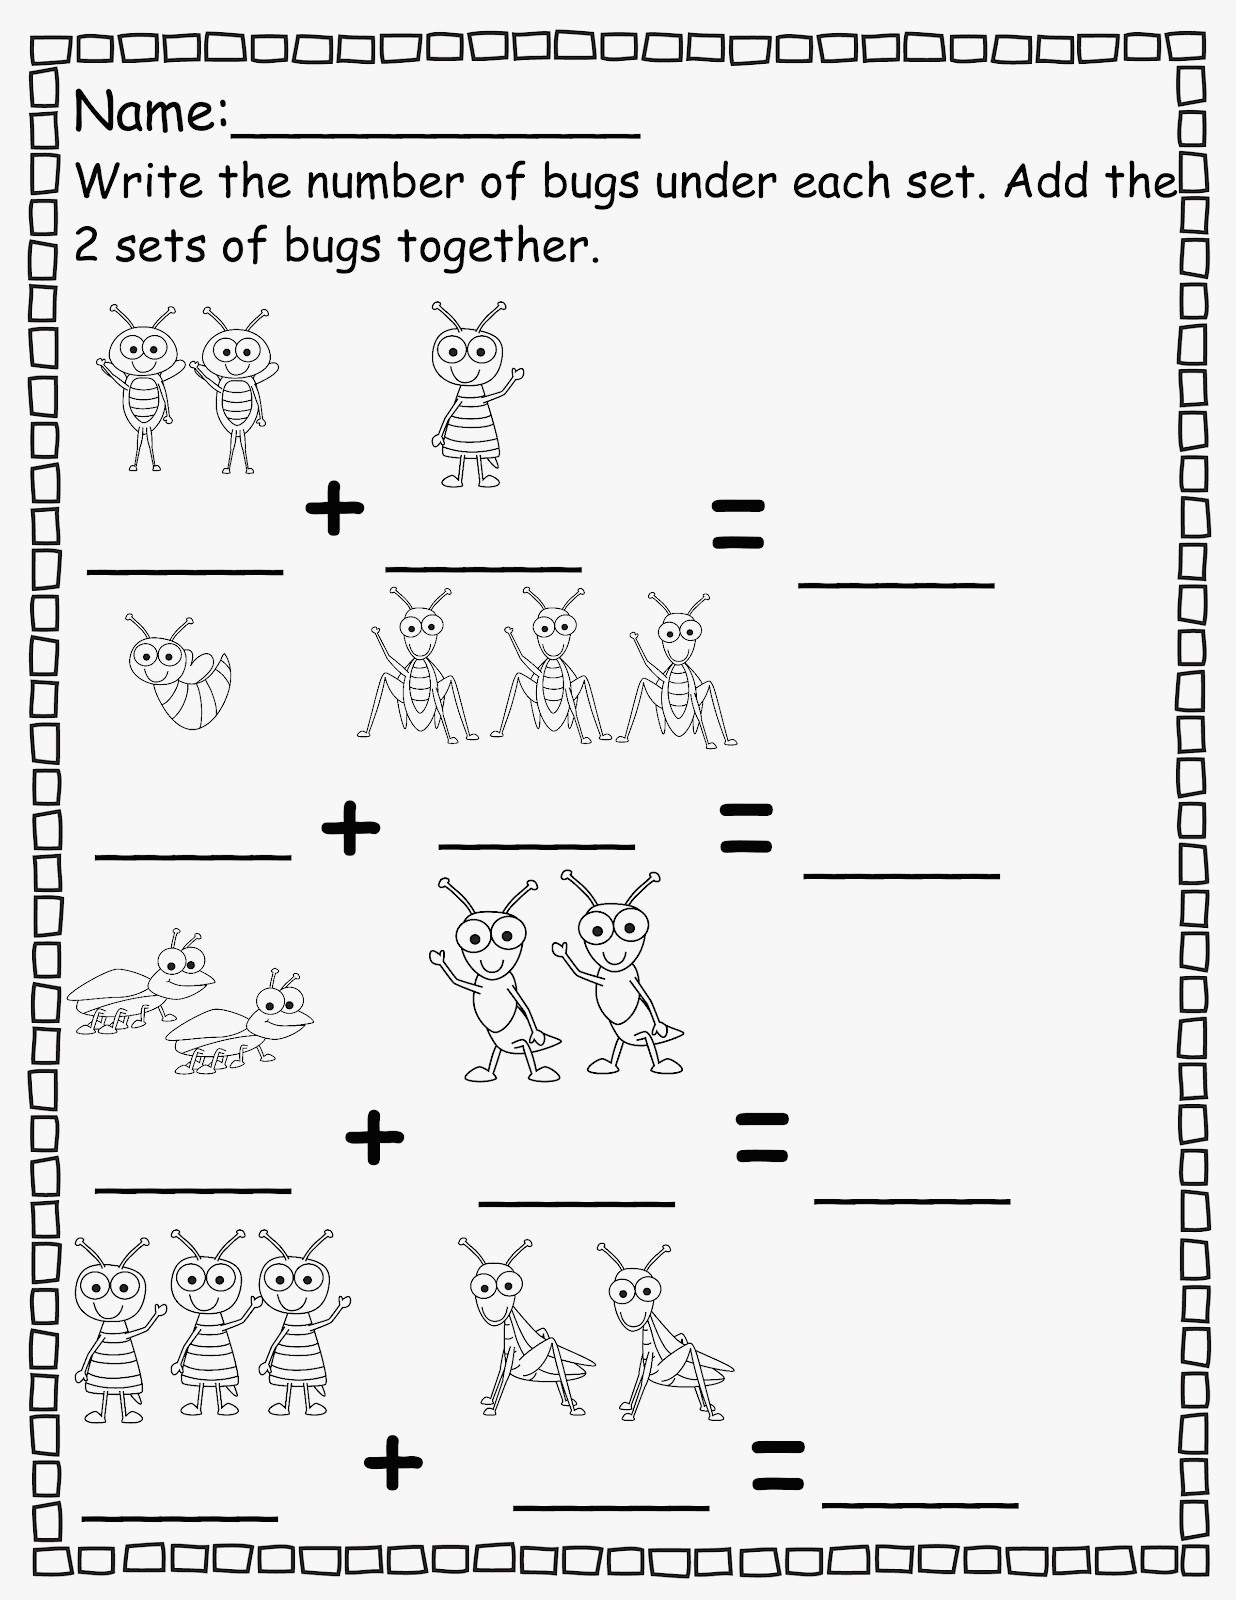 68 Lovely Of Quality Prek Worksheets Free Image